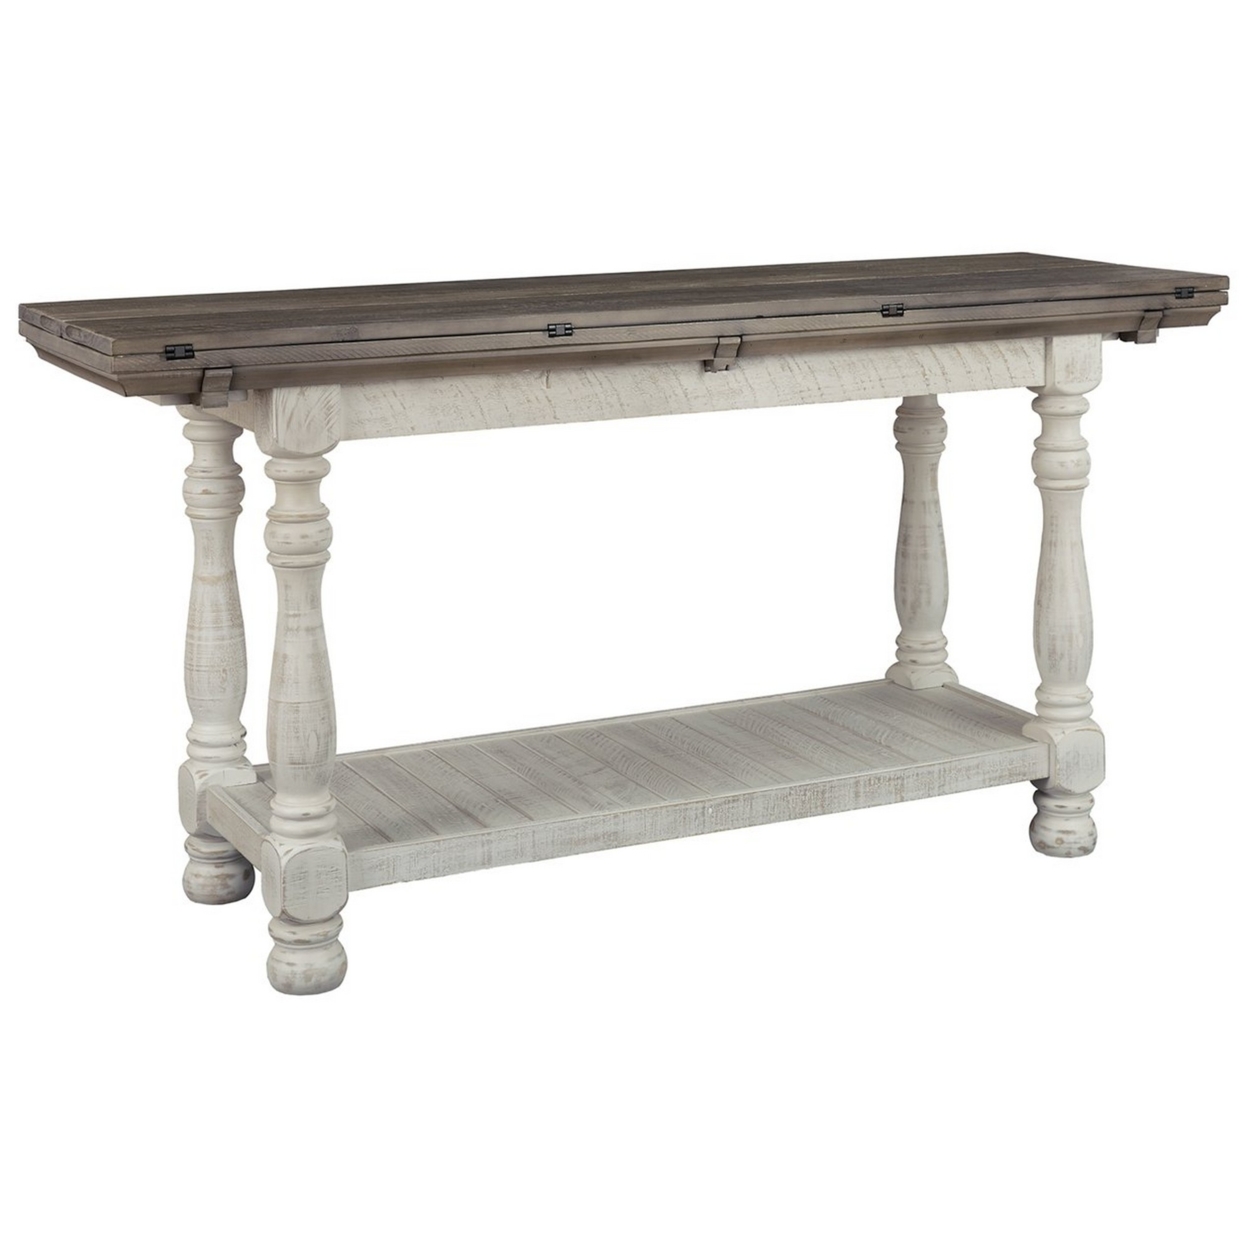 Flip Top Wooden Sofa Table With Open Bottom Shelf, Brown And Antique White- Saltoro Sherpi